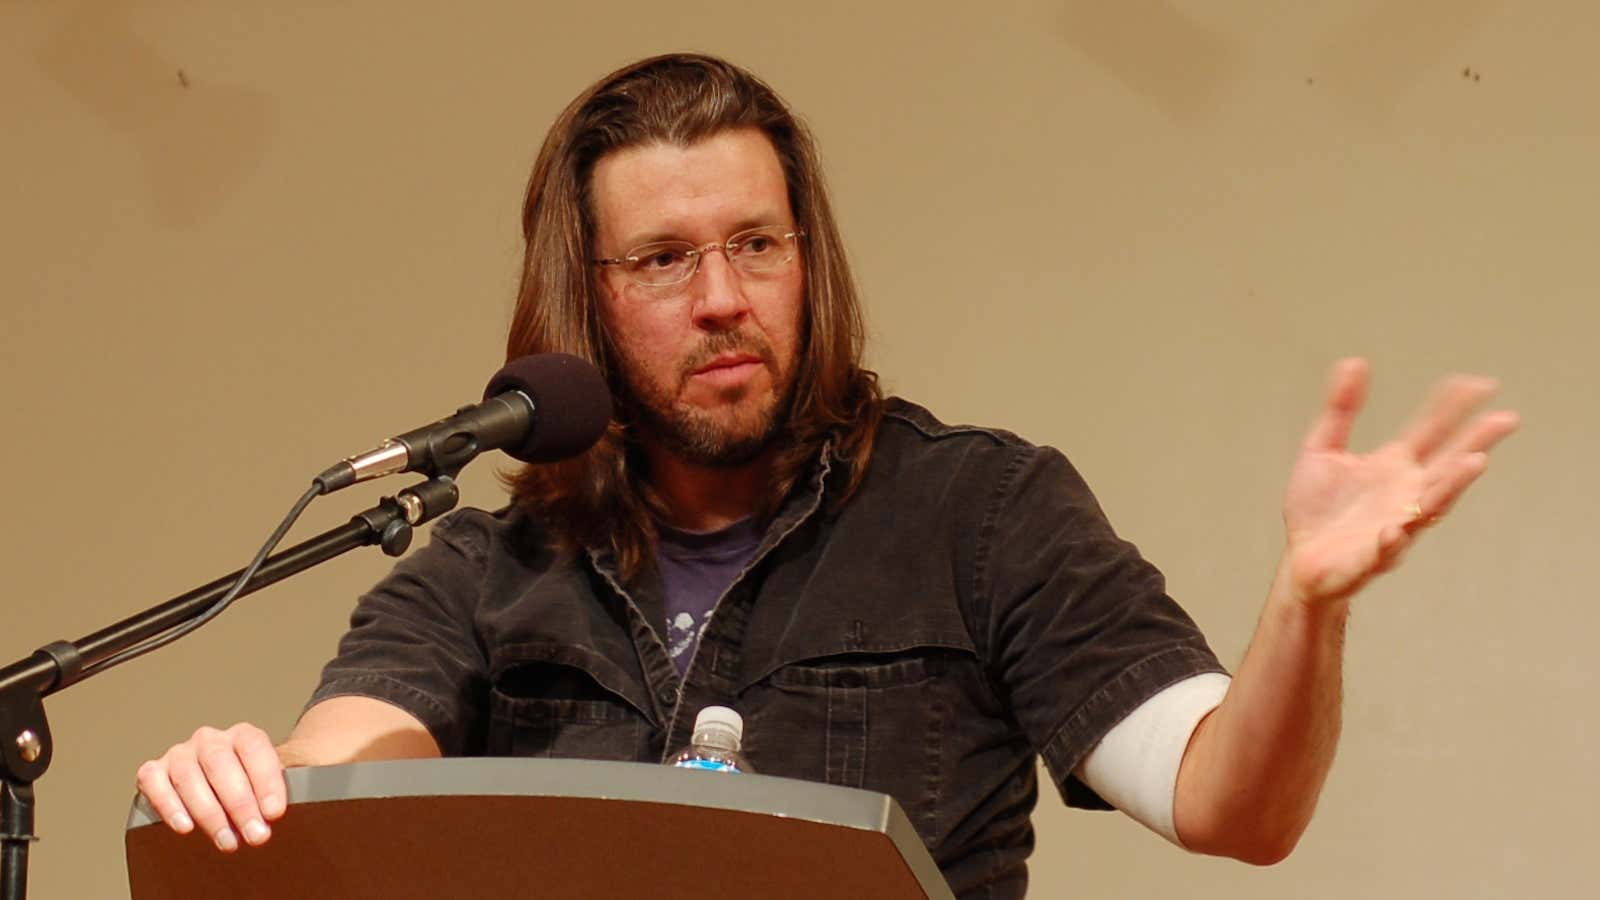 David Foster Wallace delivers his famous “This Is Water” speech at Kenyon College’s 2005 commencement.